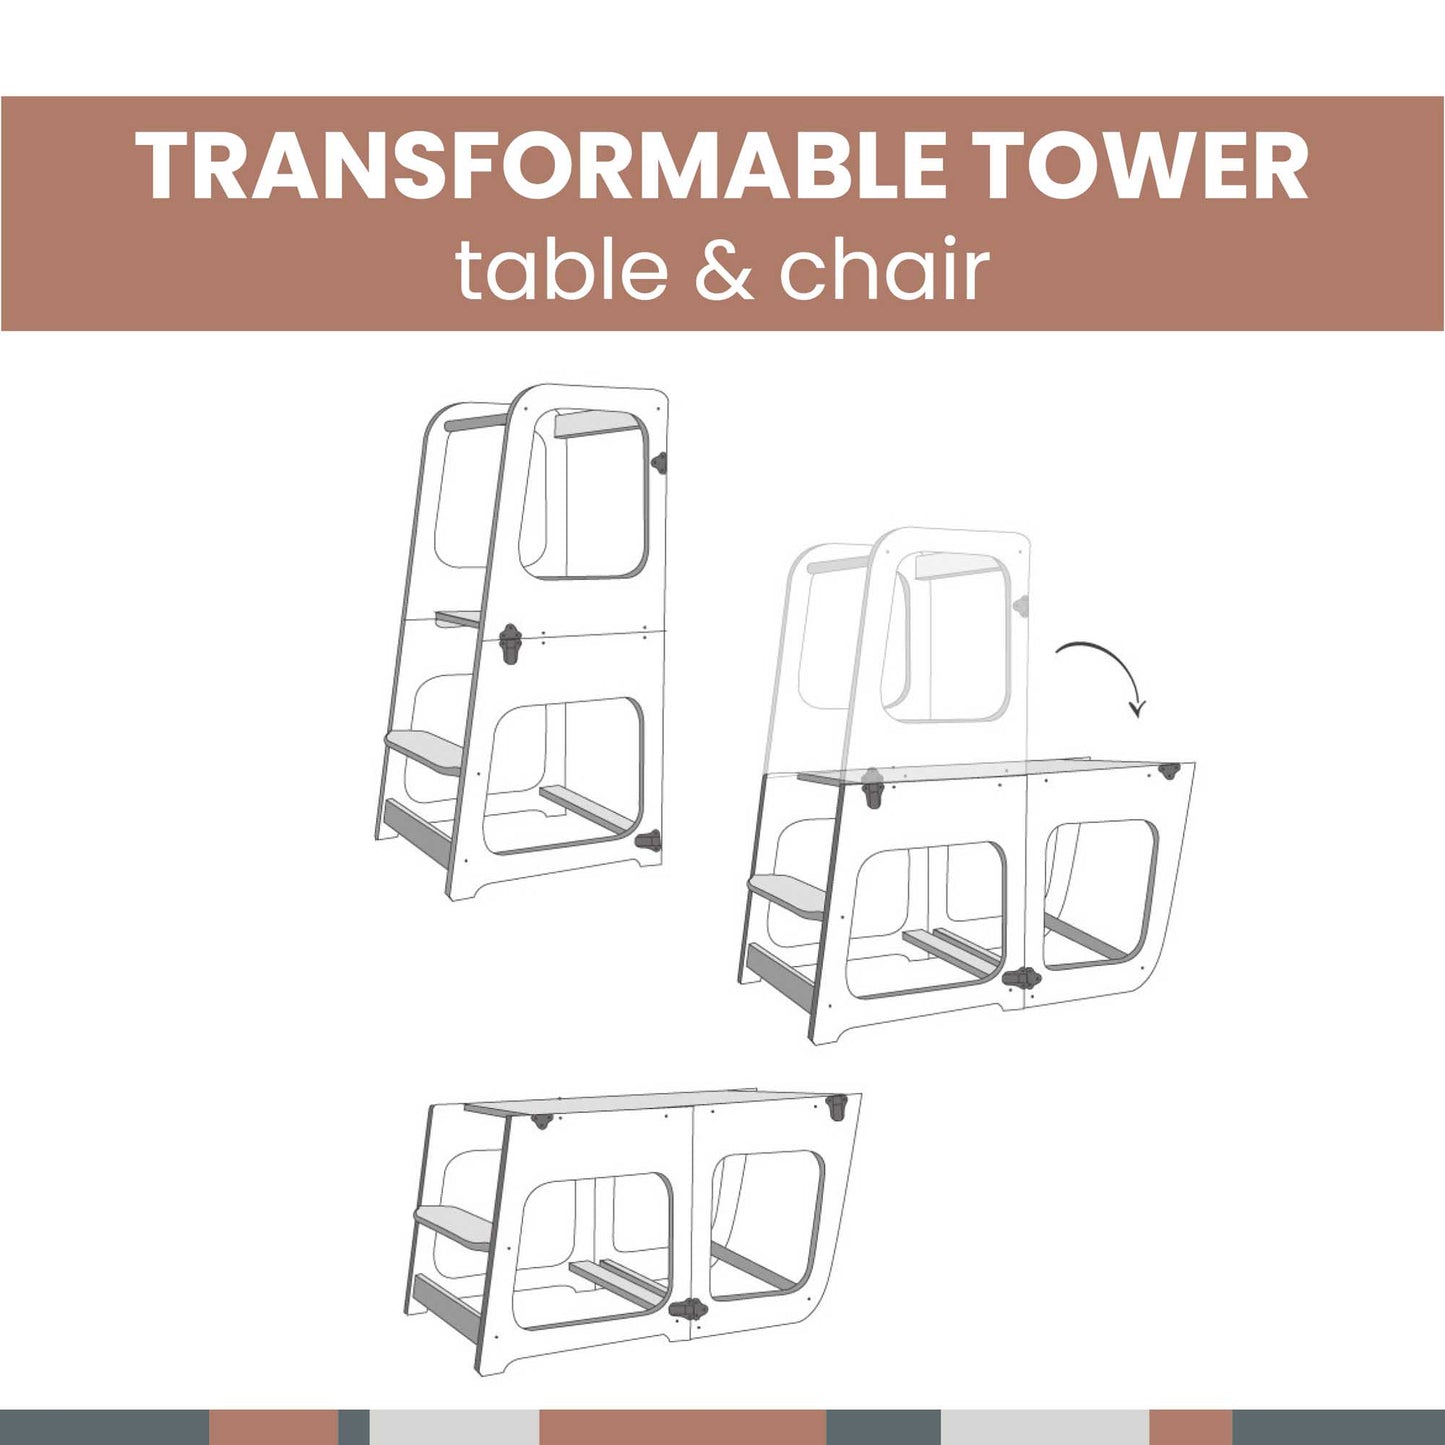 2-in-1 transformable kitchen tower - table and chair perfect for kids from Sweet Home From Wood.